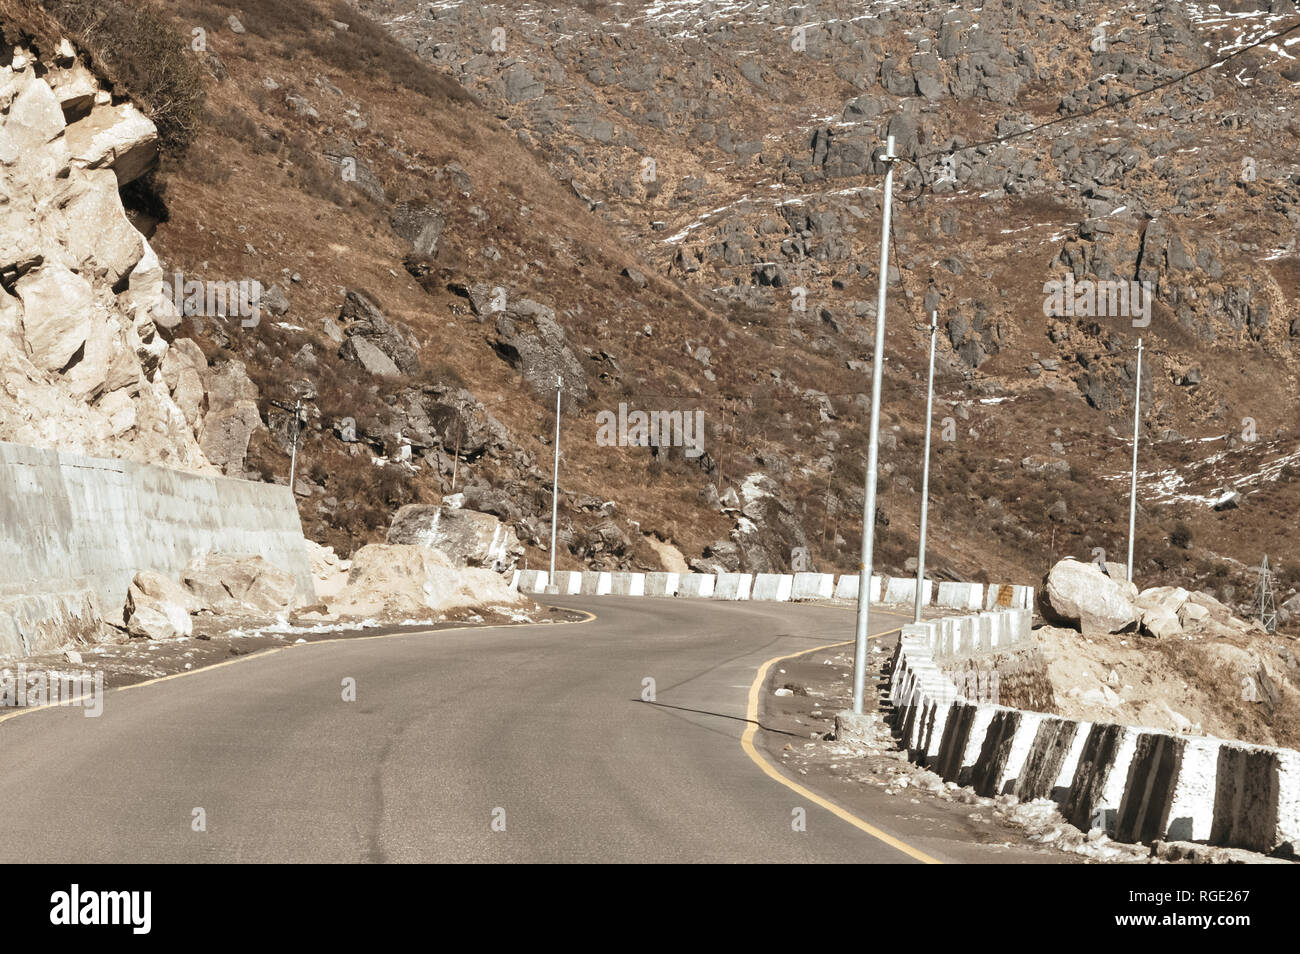 Highway road view of India China border near Nathu La mountain pass in Himalayas which connects Indian state Sikkim with China's Tibet Region, trisect Stock Photo